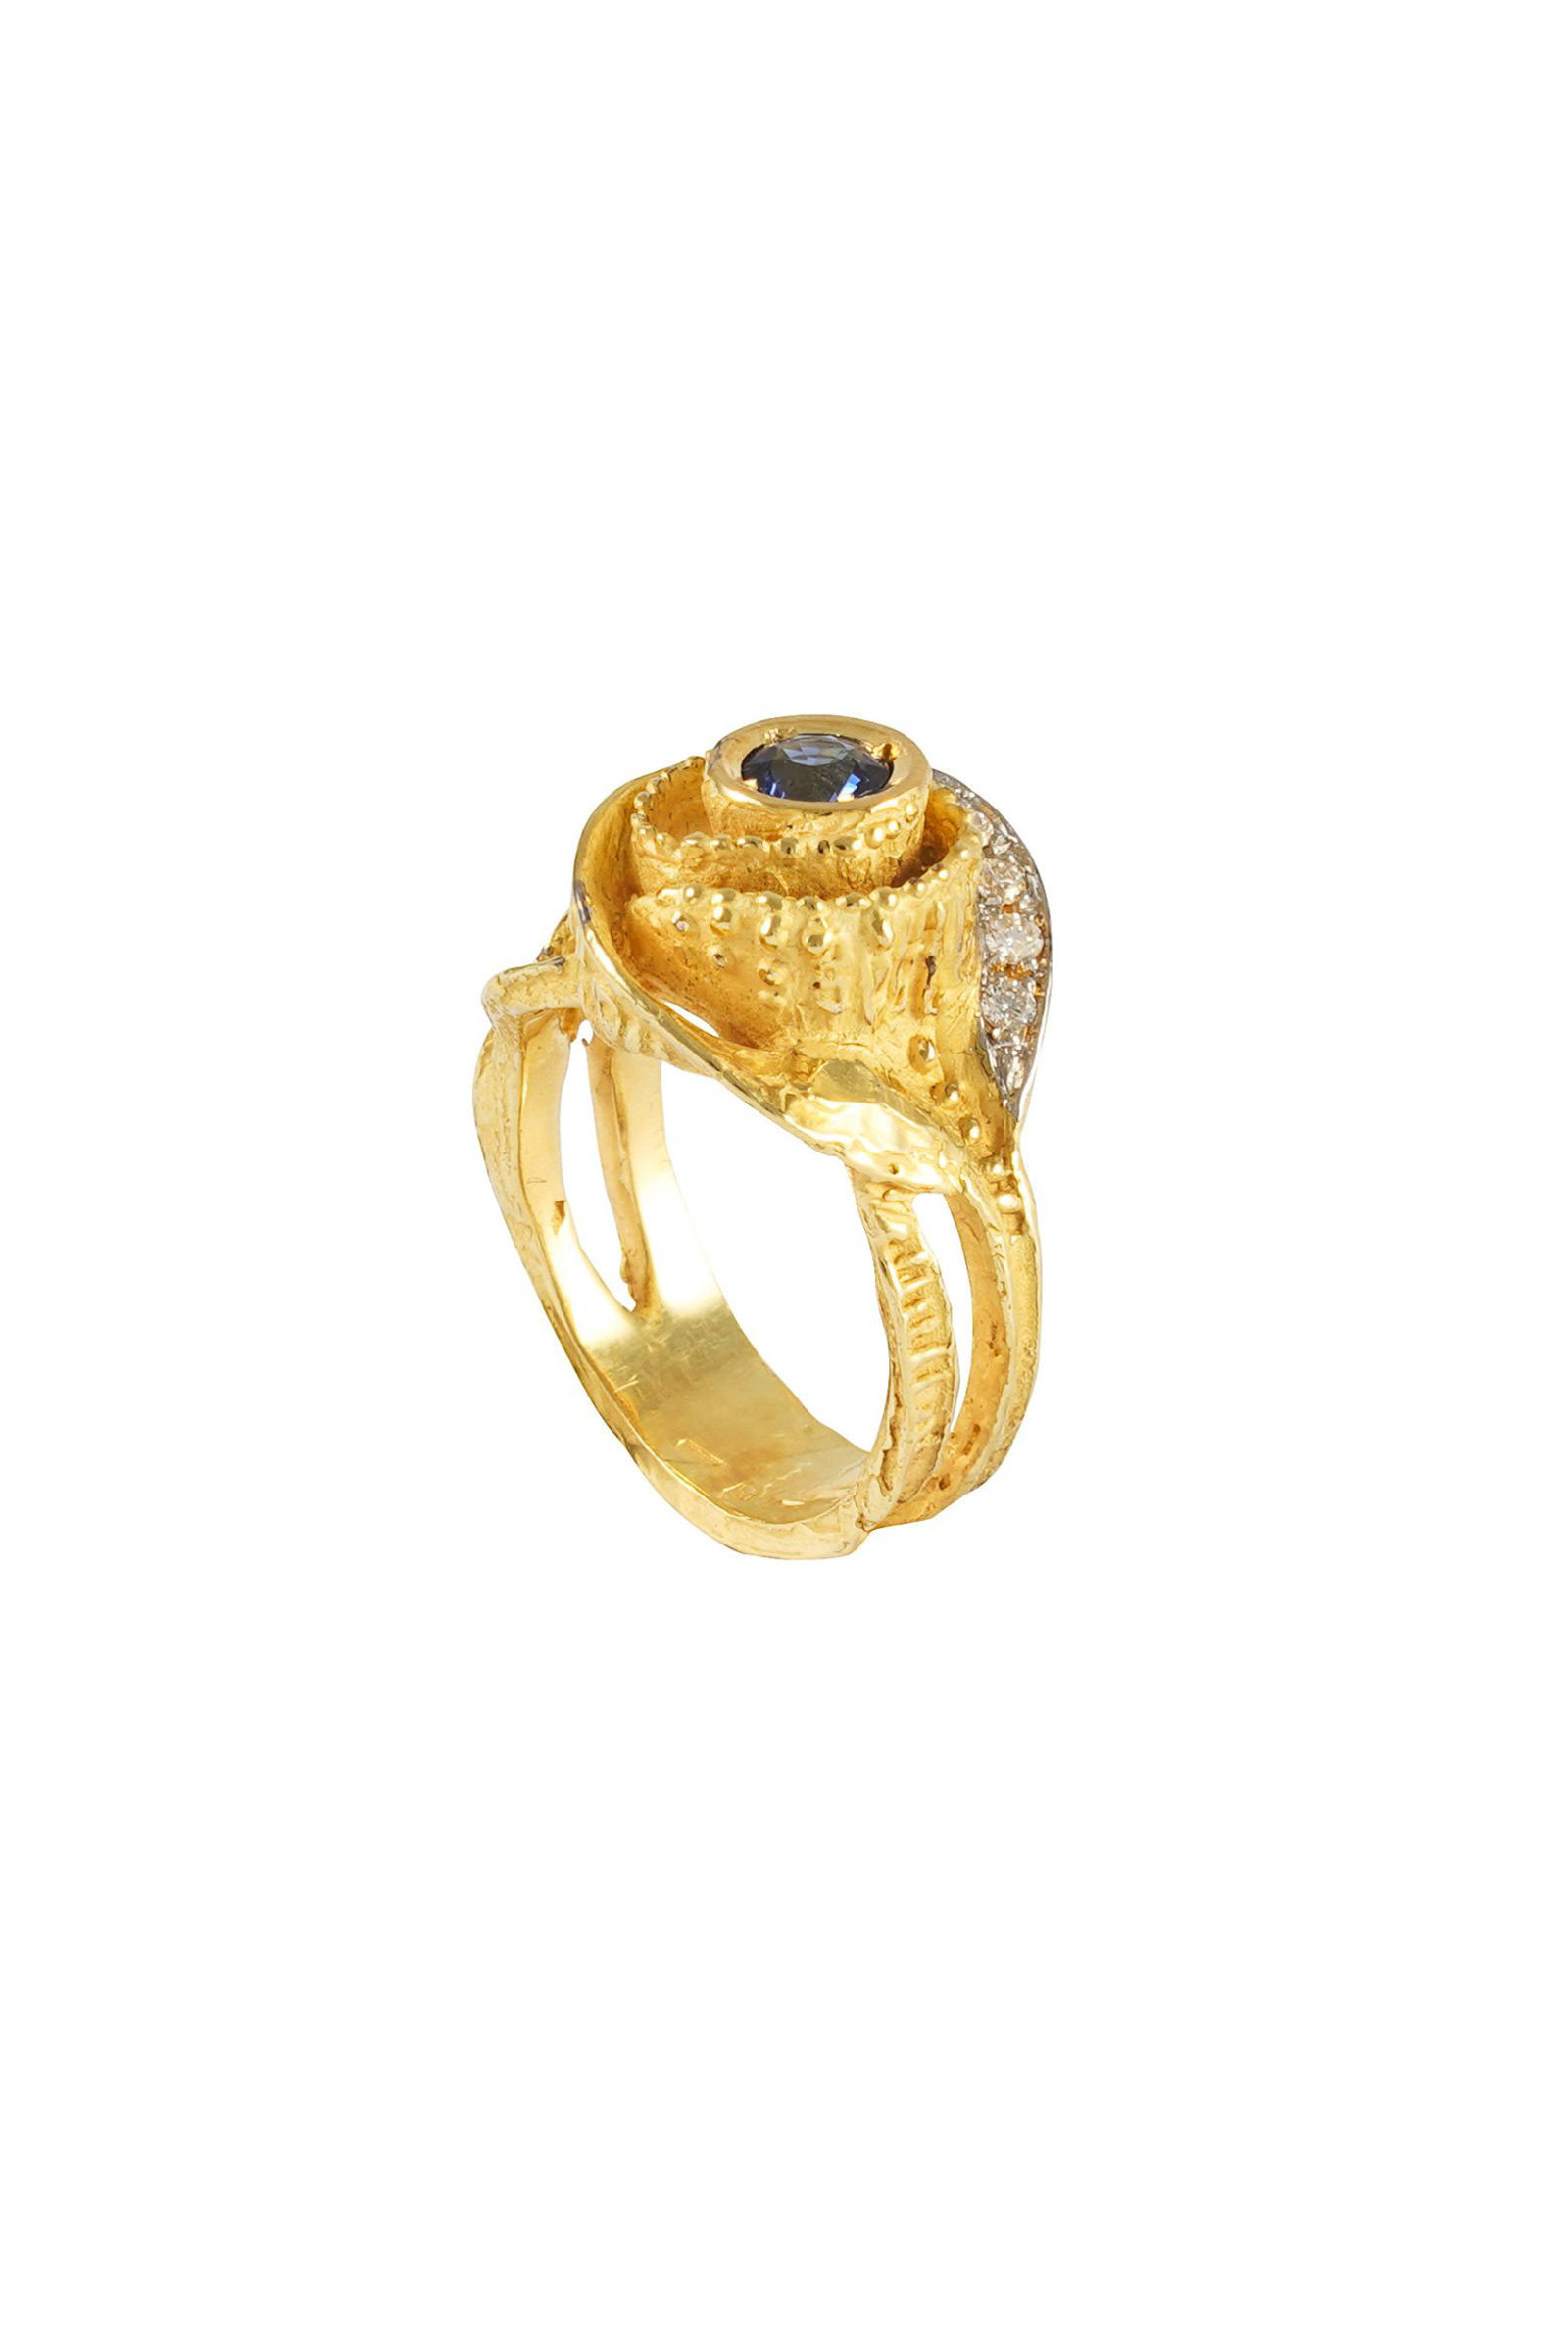 SE27A-18-Kt-Yellow-Gold-with-Sapphire-and-Diamonds-1X